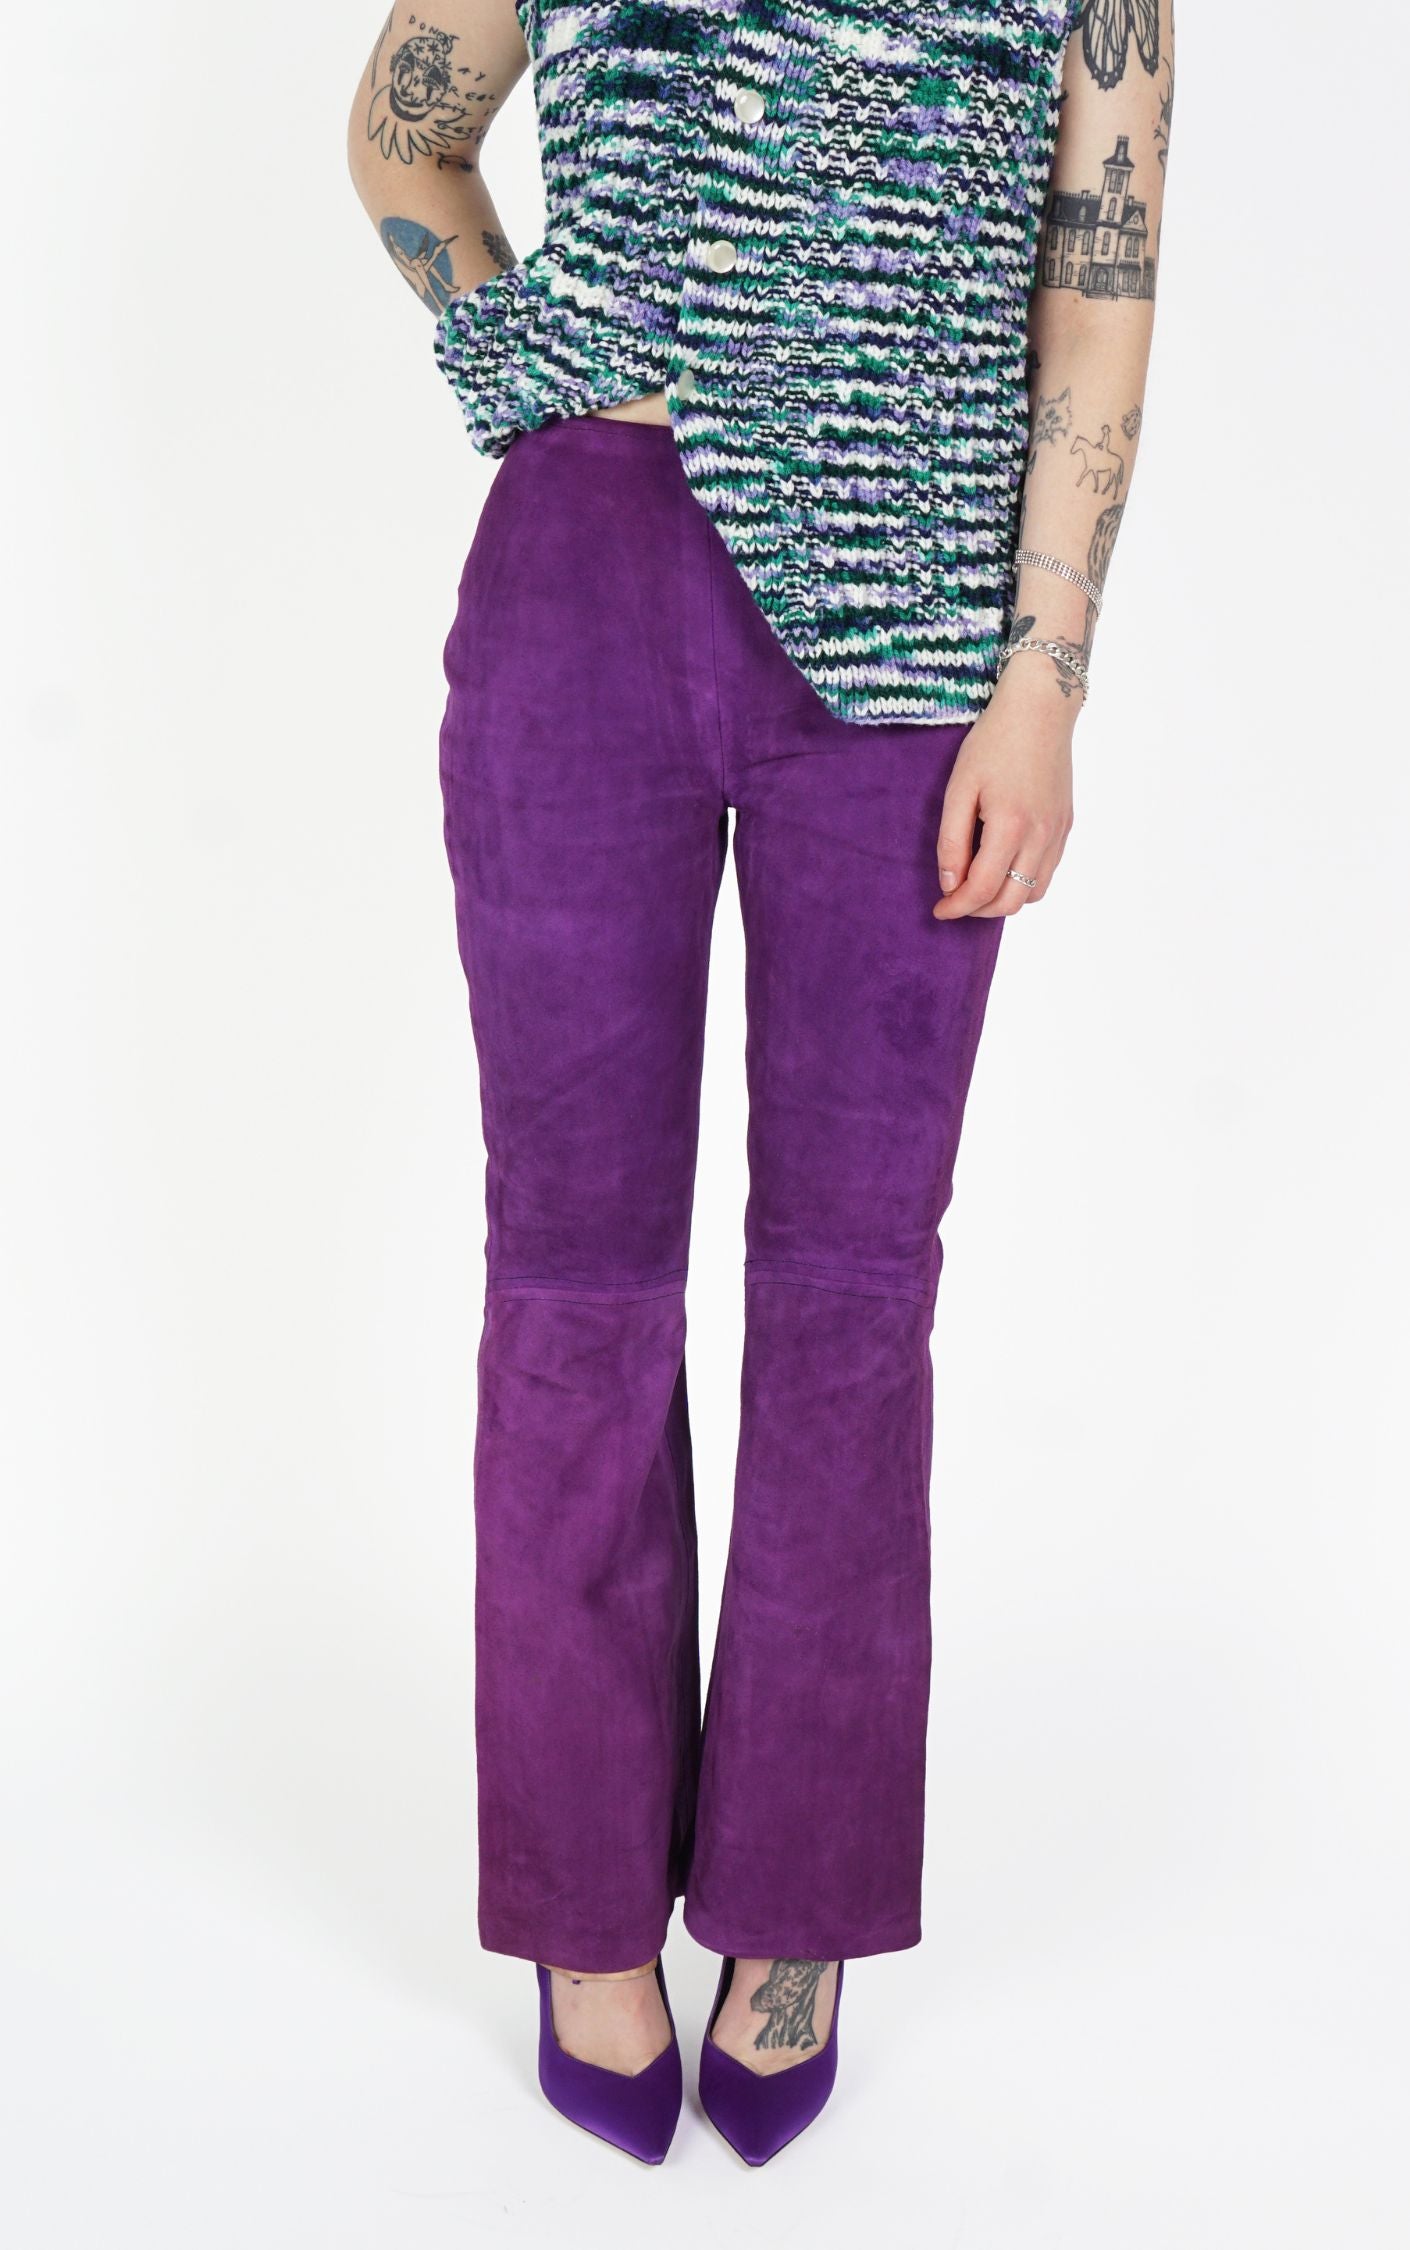 VINTAGE 80s Purple Suede Flared Bootcut High Rise Pants resellum